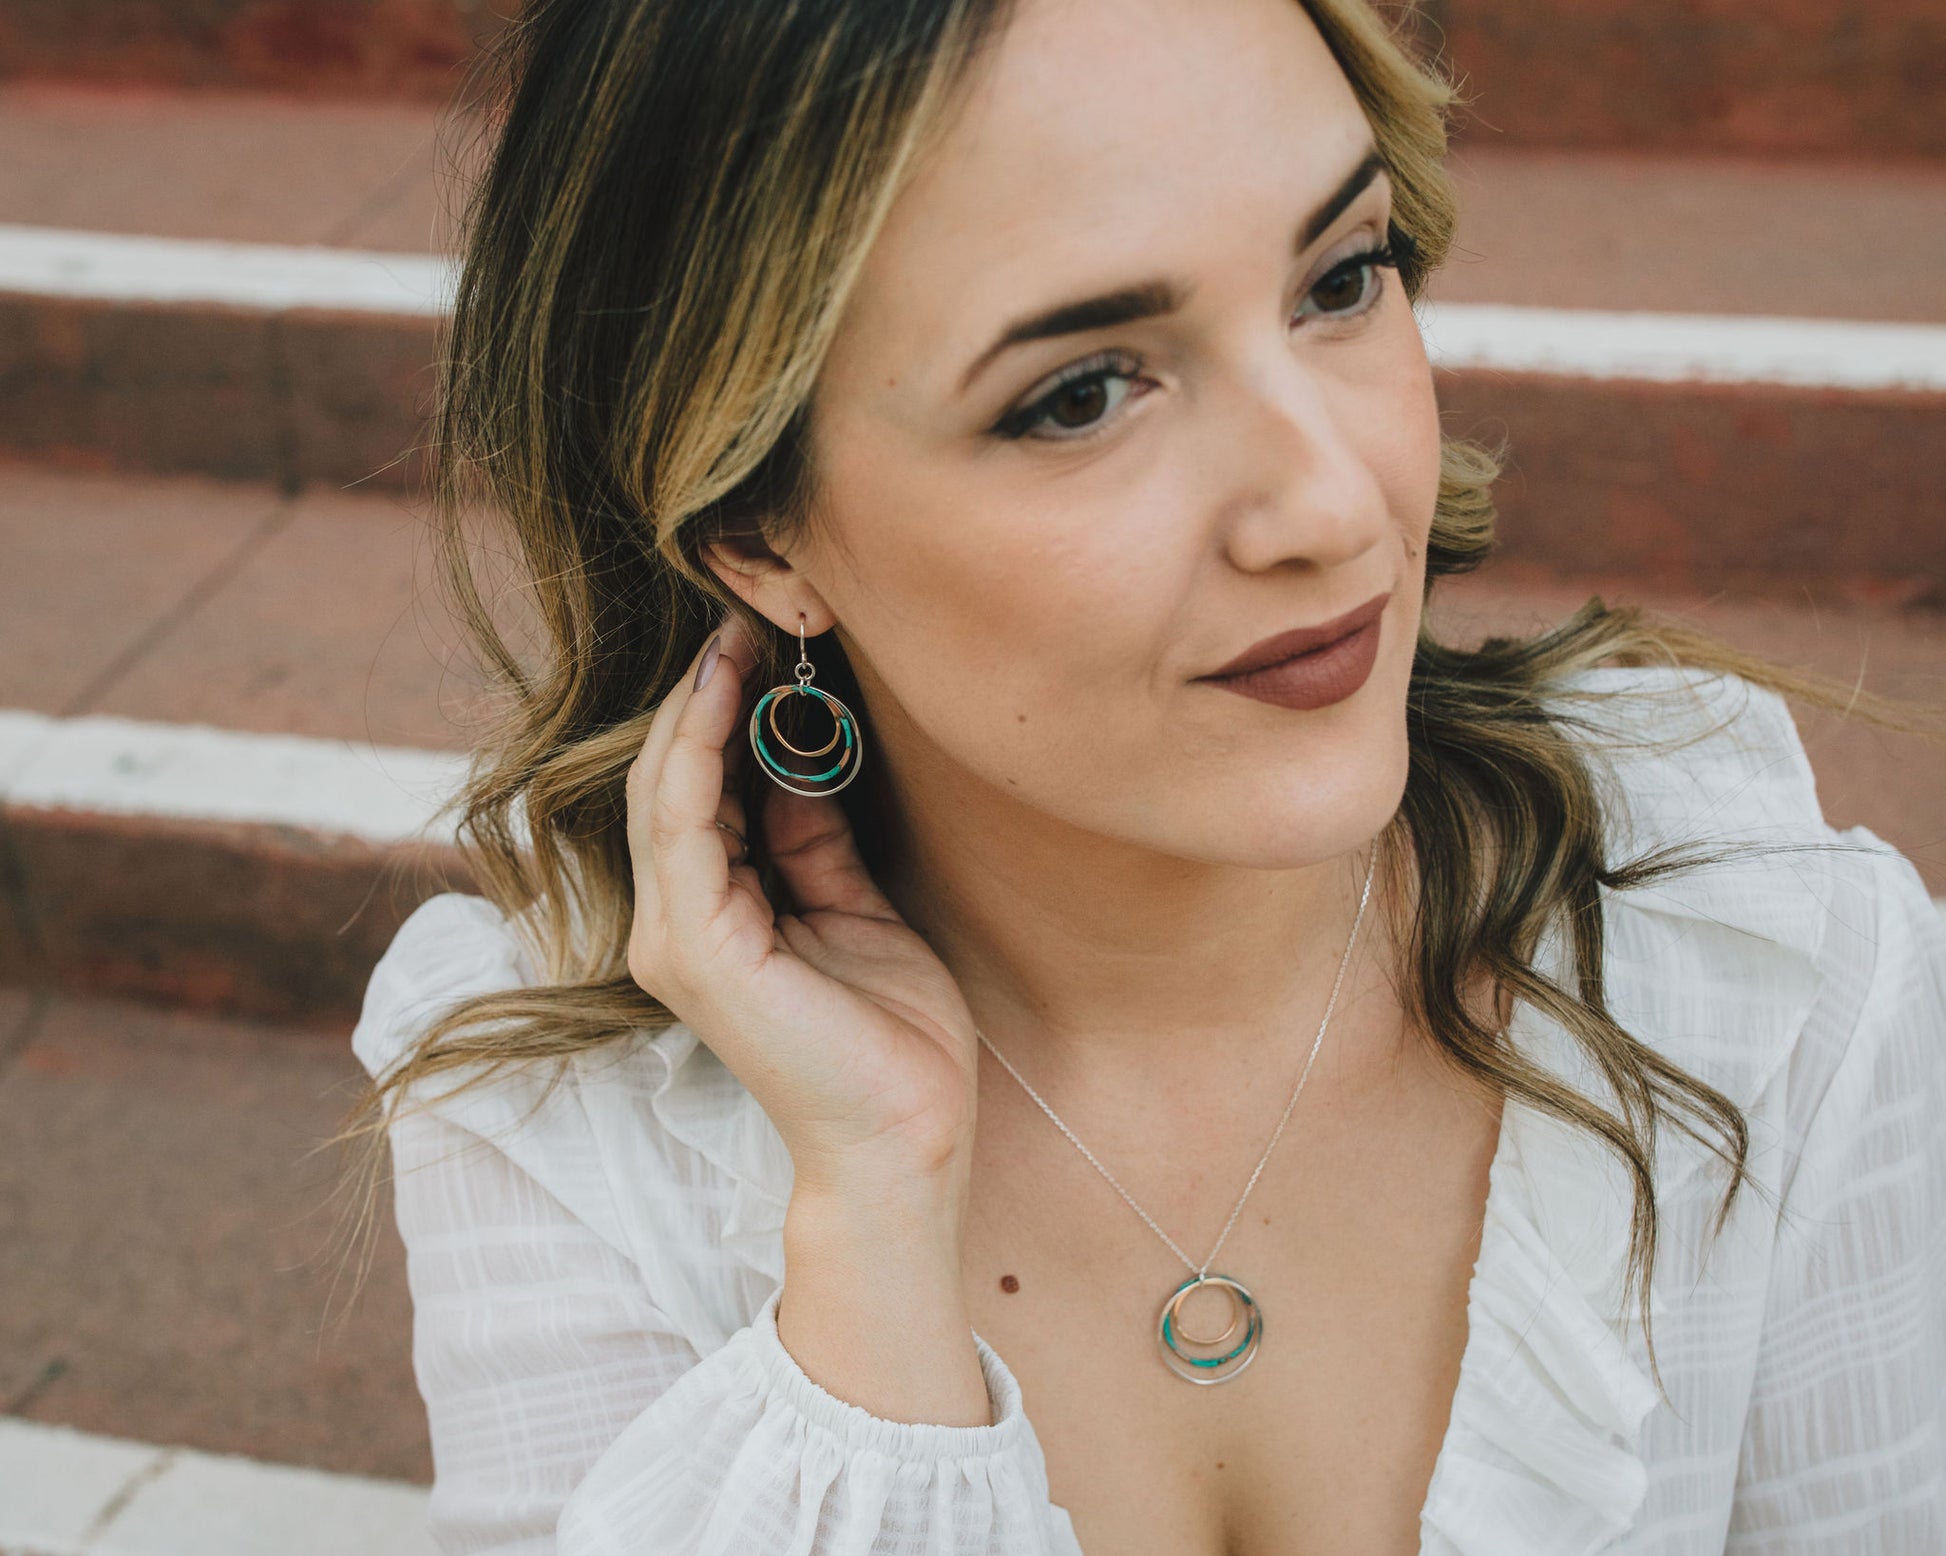 These lively and luxurious mixed metal earrings are destined to become an instant everyday favorite. Complete your set with our matching mixed metal necklace! All of our completely hand forged and handcrafted pieces come beautifully packaged.